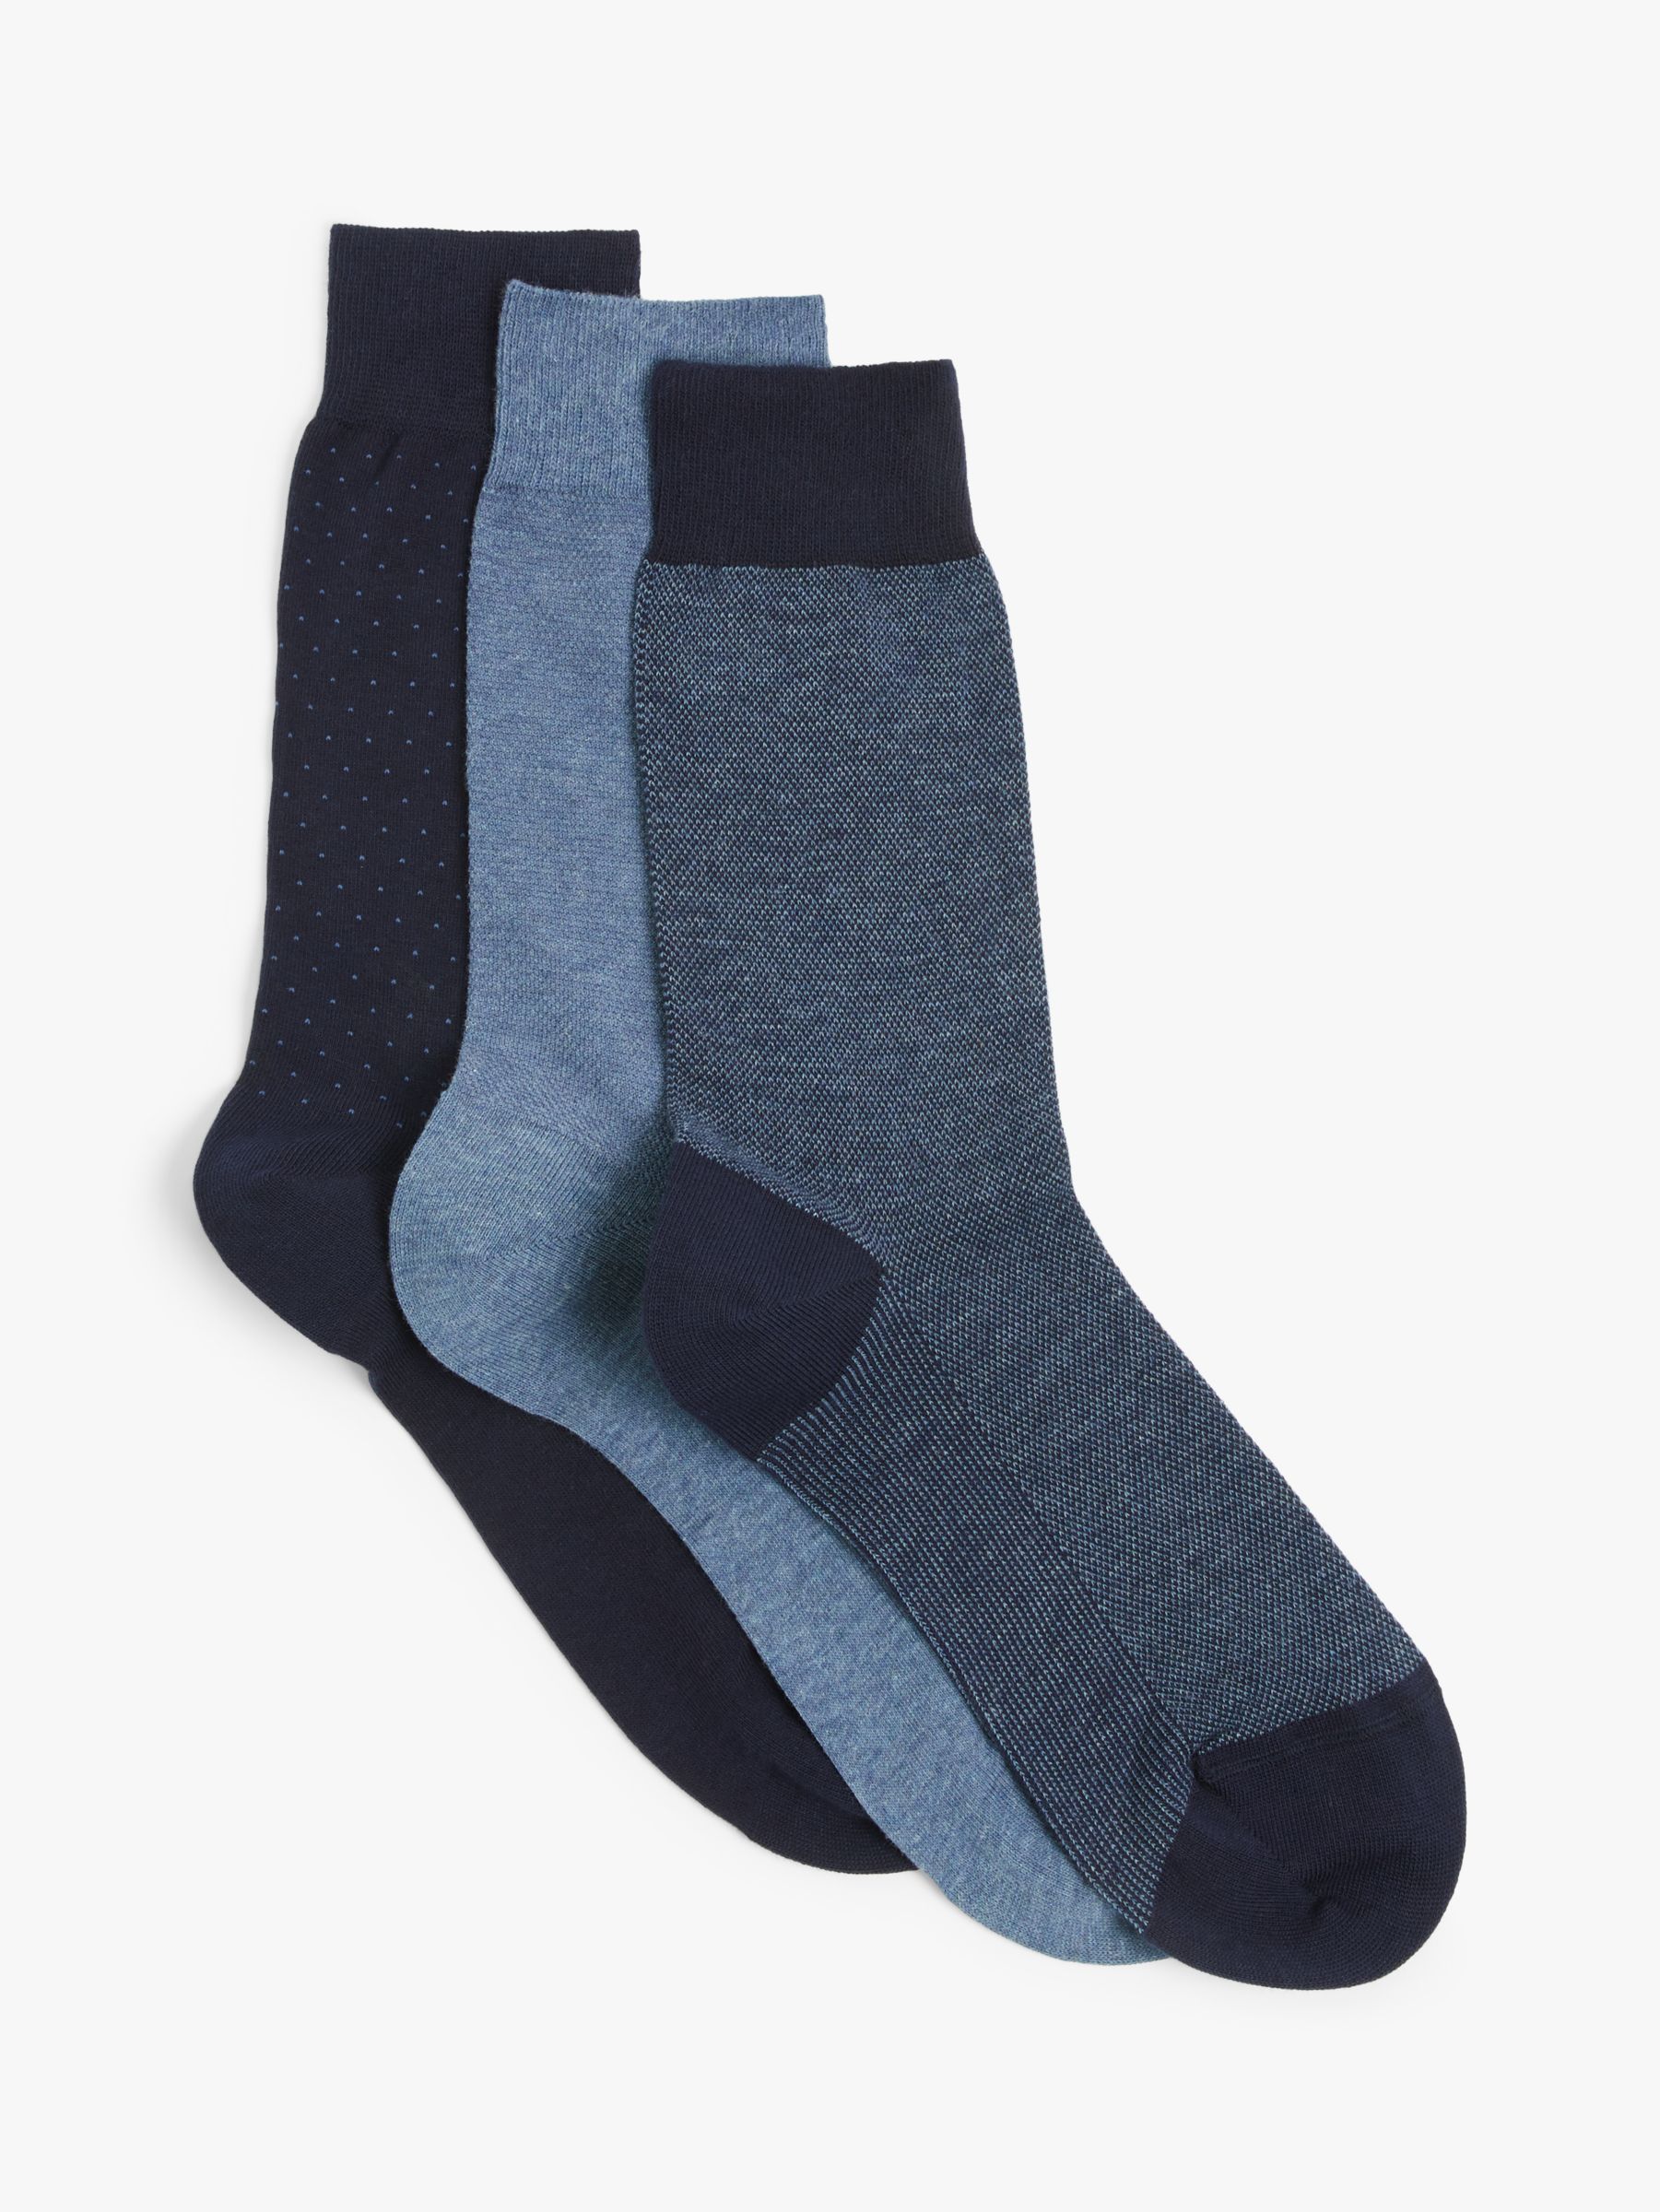 Buy John Lewis Made in Italy Cotton Patterned Socks, Pack of 3, Blue/Navy Online at johnlewis.com